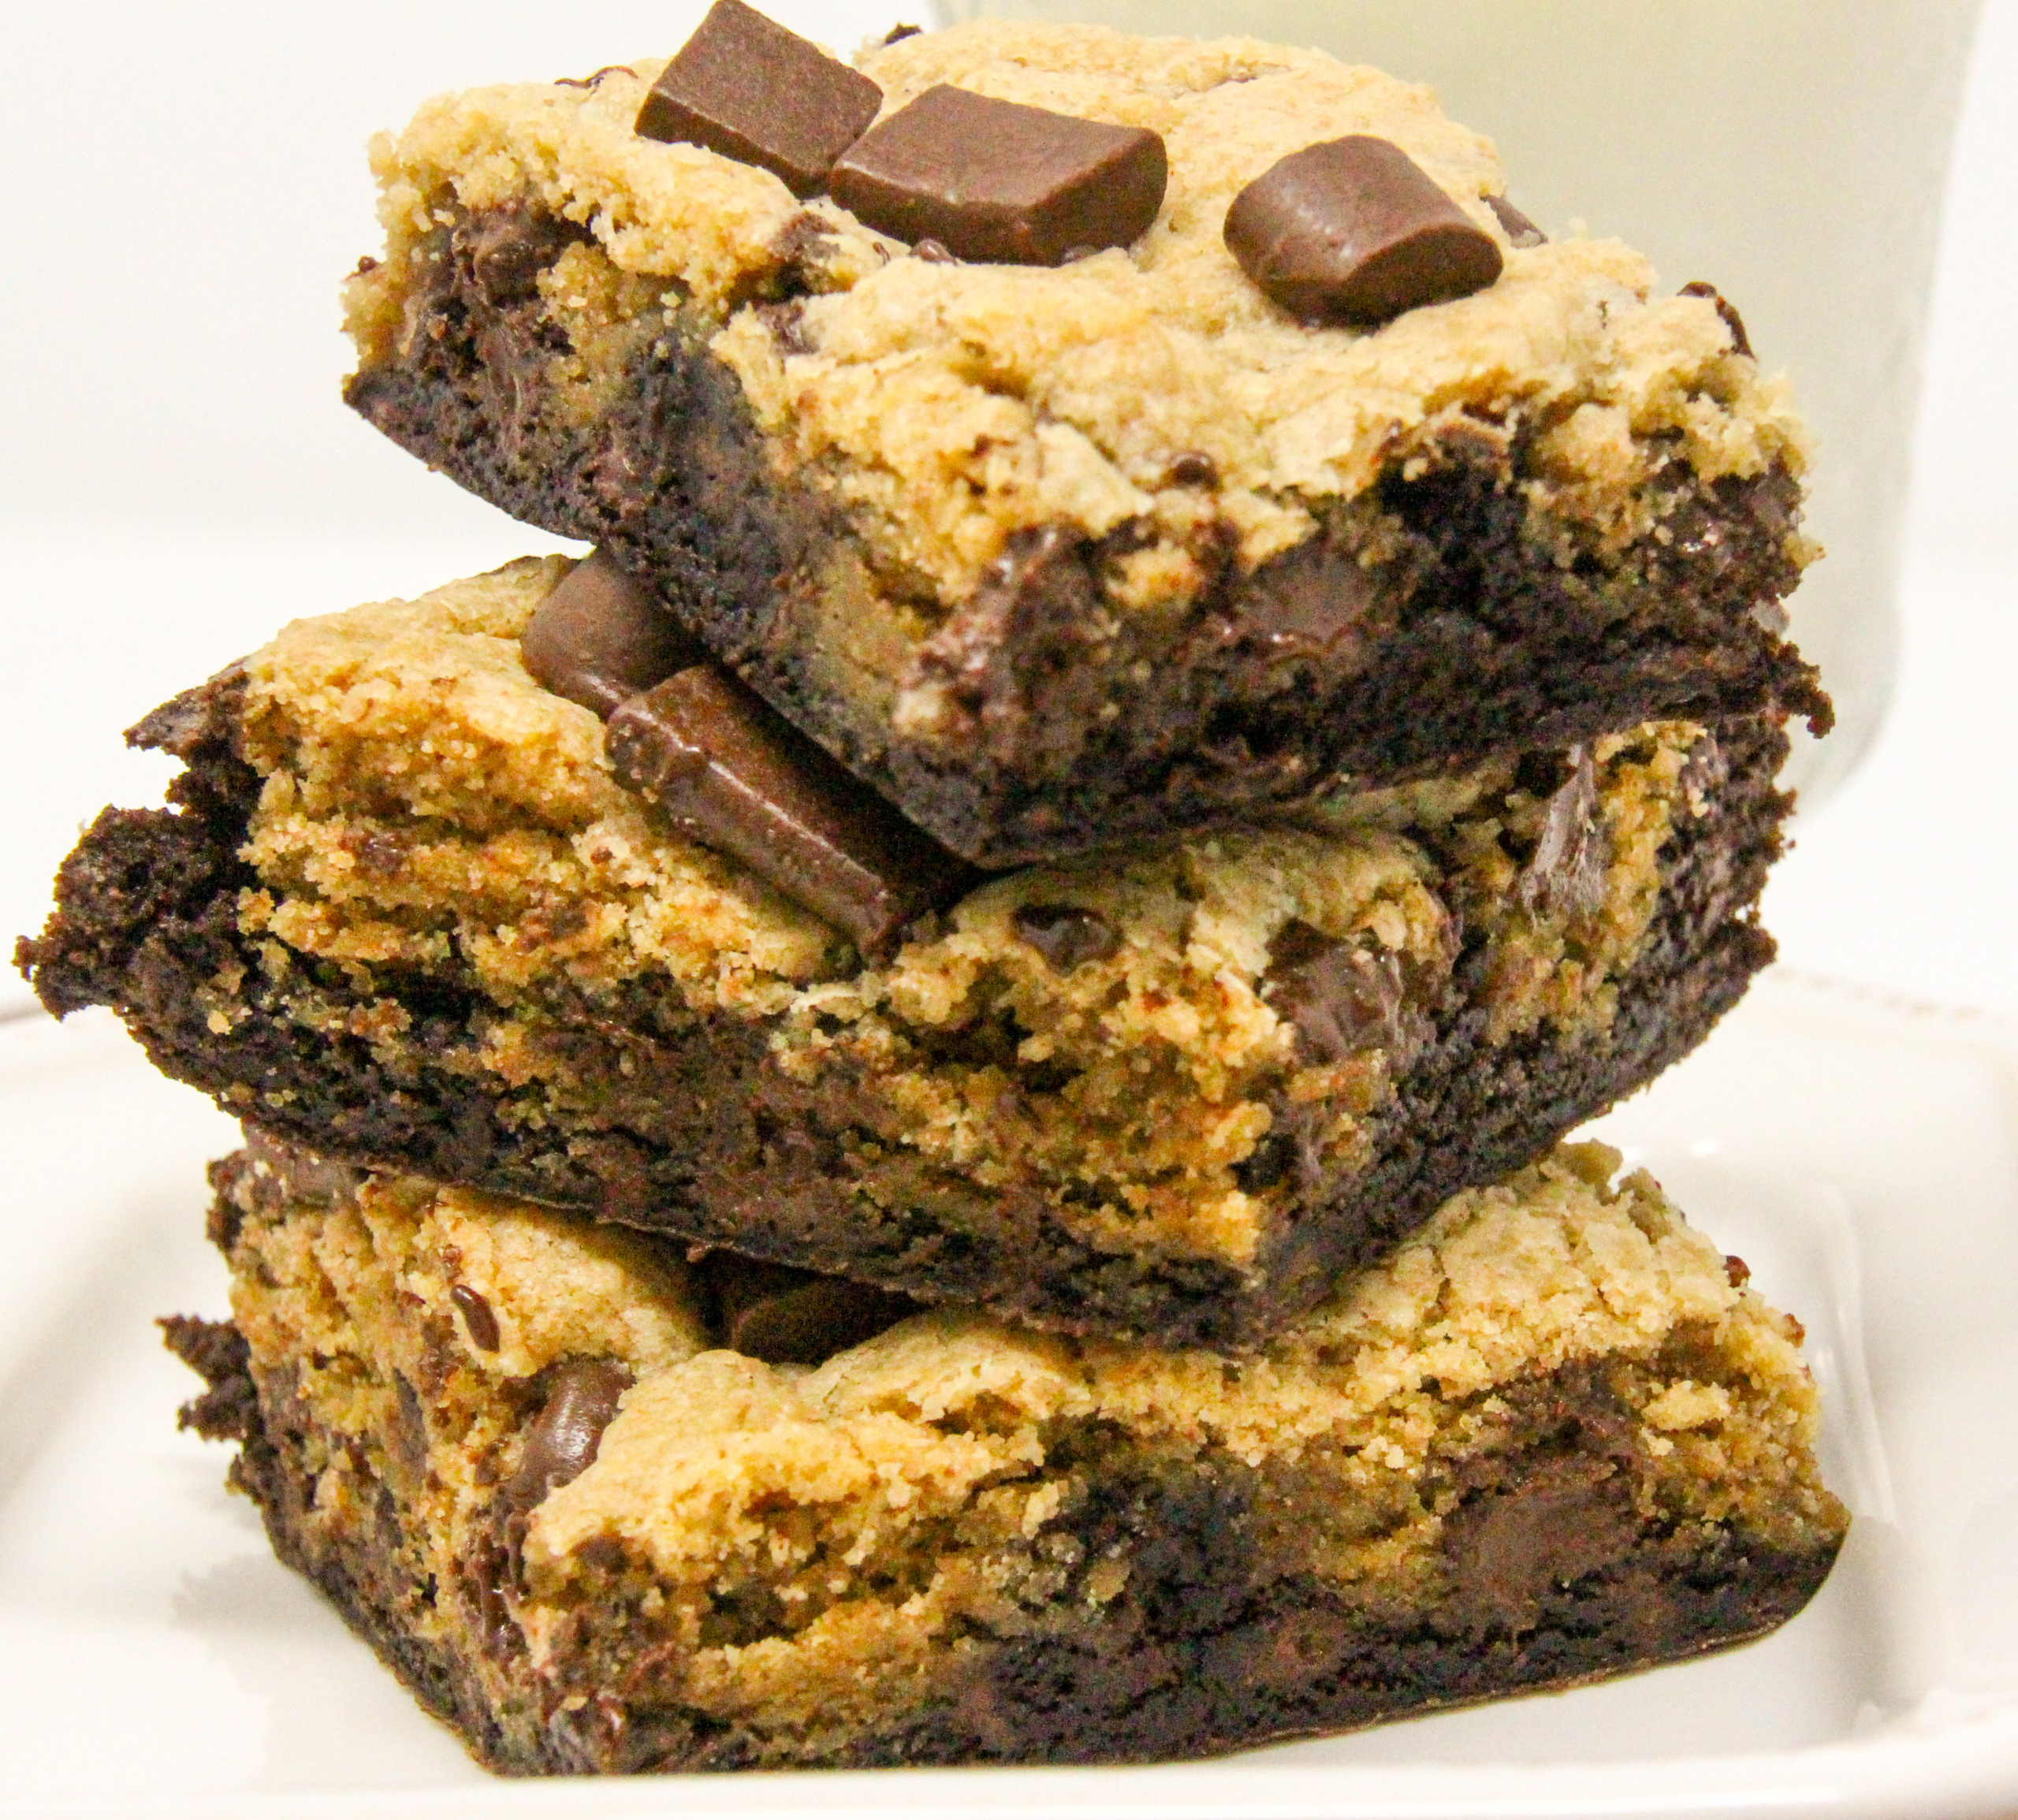 Brookies are a combination of rich, chocolatey brownies topped with chocolate chip cookie dough and garnished with dark chocolate chunks. Pure yumminess in one bar! Recipe created by Cinnamon & Sugar for Ellen Byron, author of A VERY WOODSY MURDER.